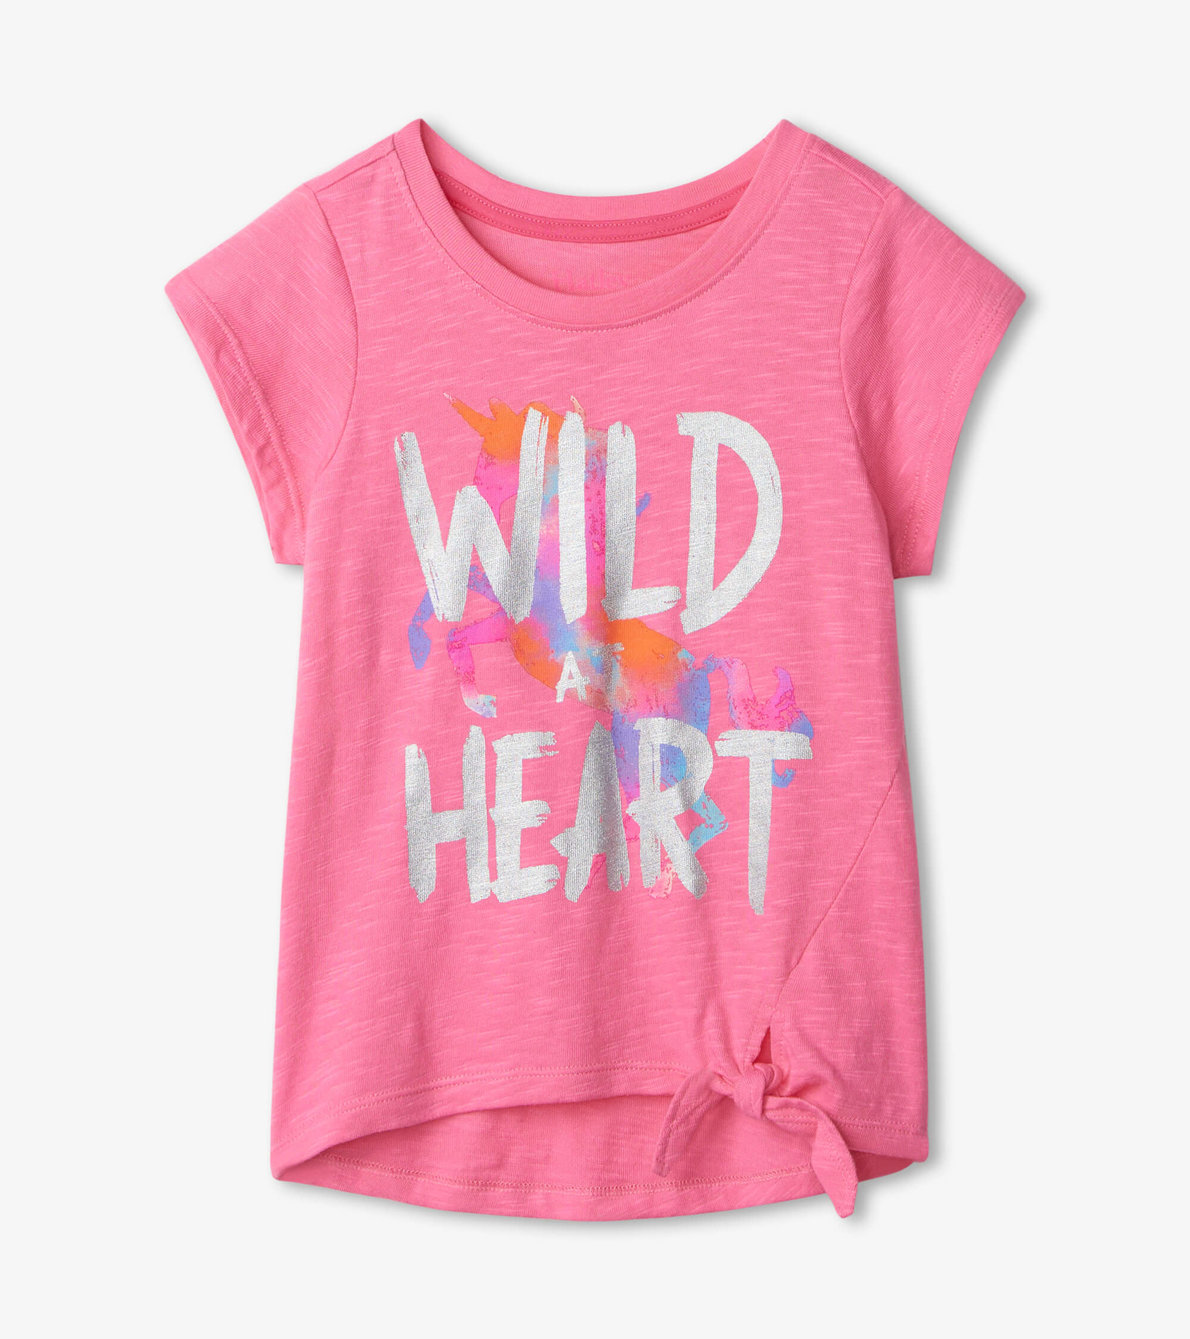 View larger image of Wild at Heart Tie Front Tee